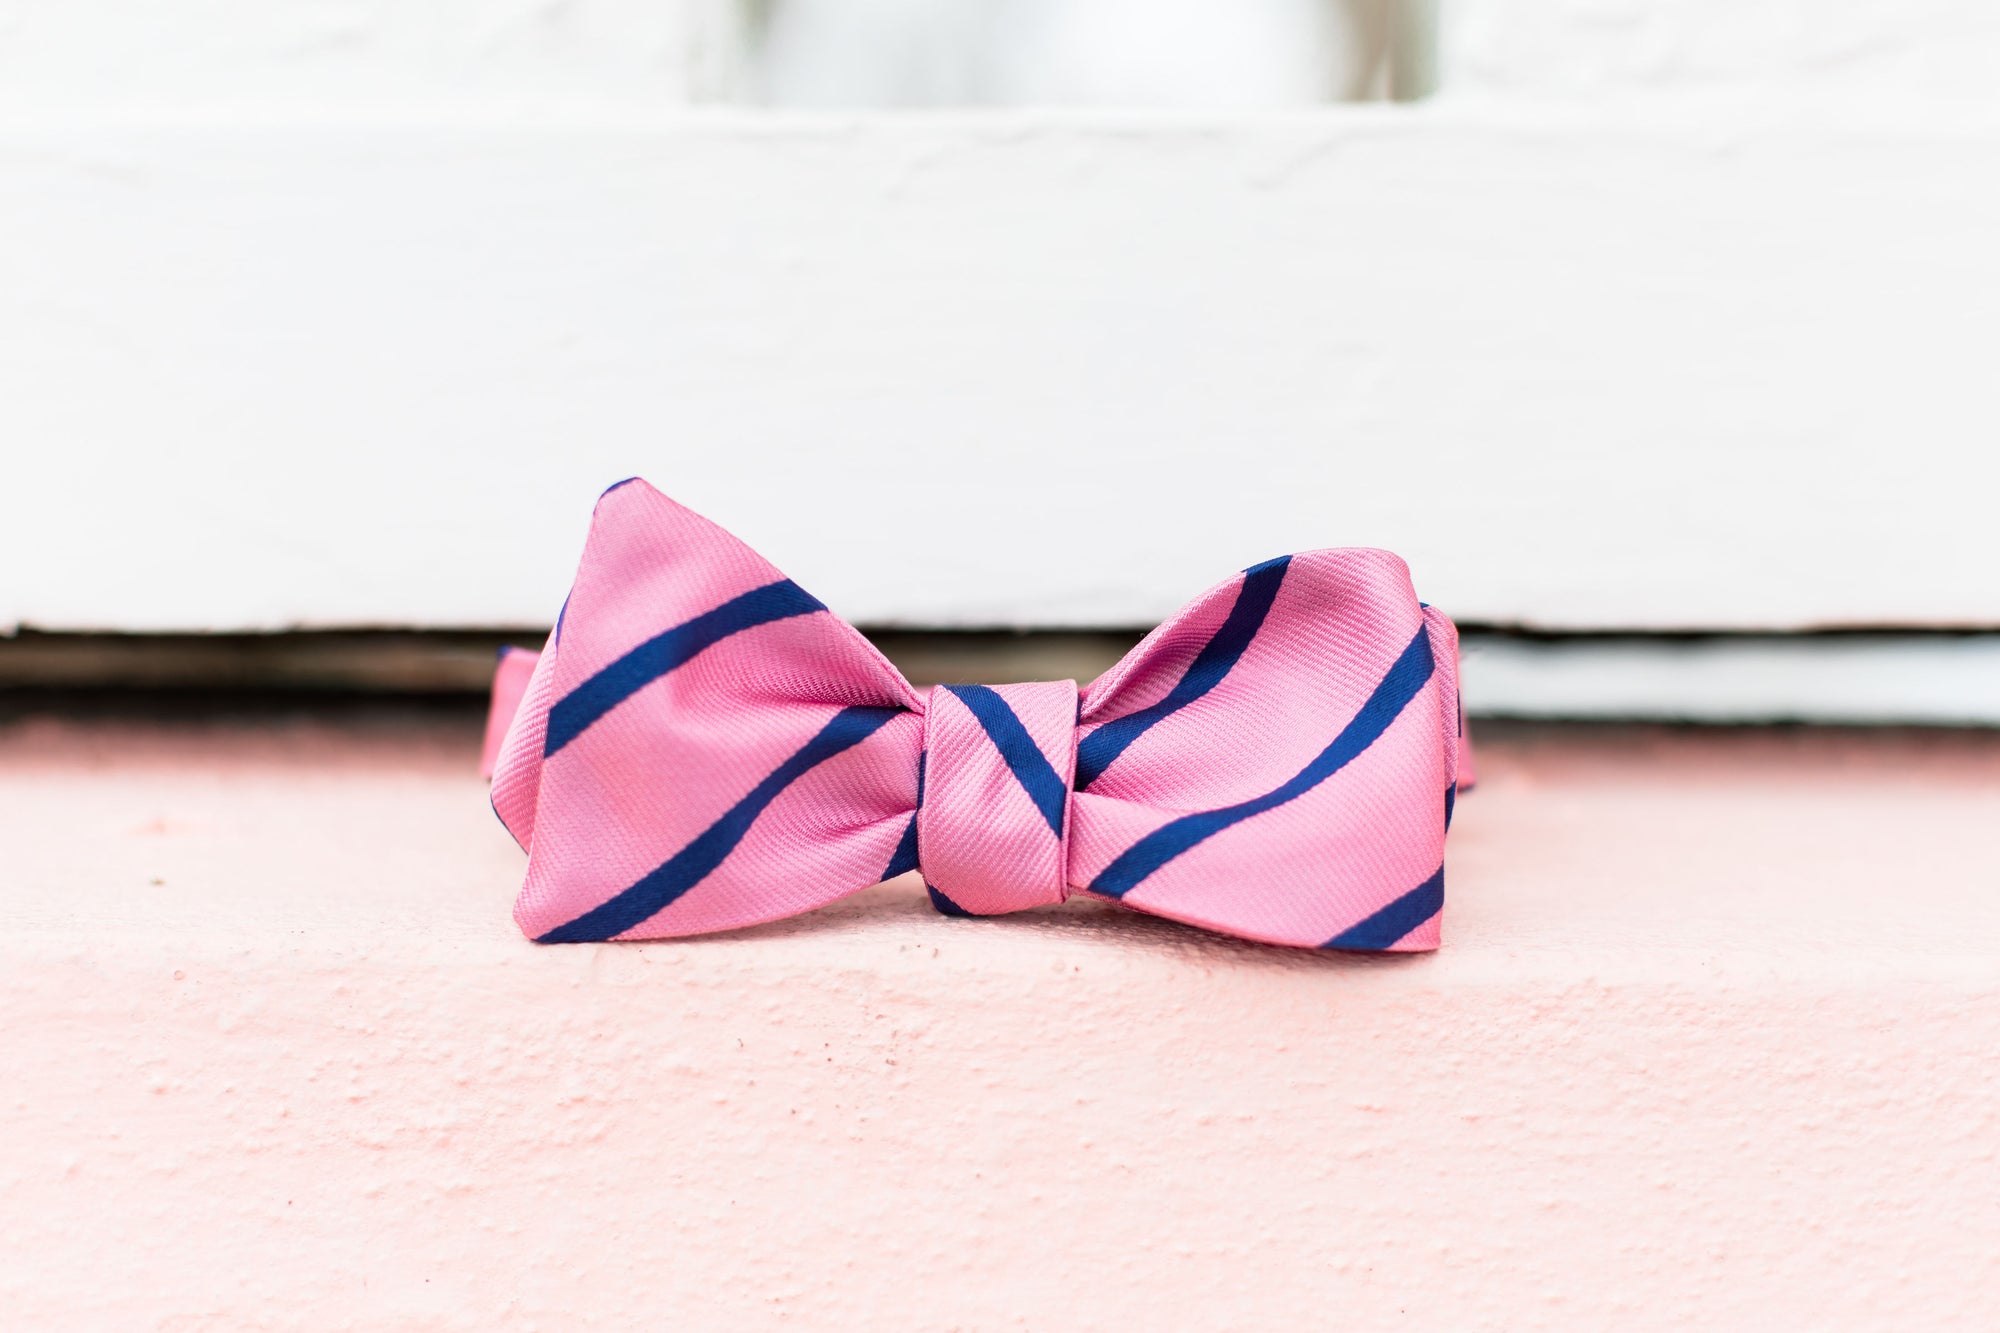 Men's pink bow tie. 100% silk with a blue striped design.